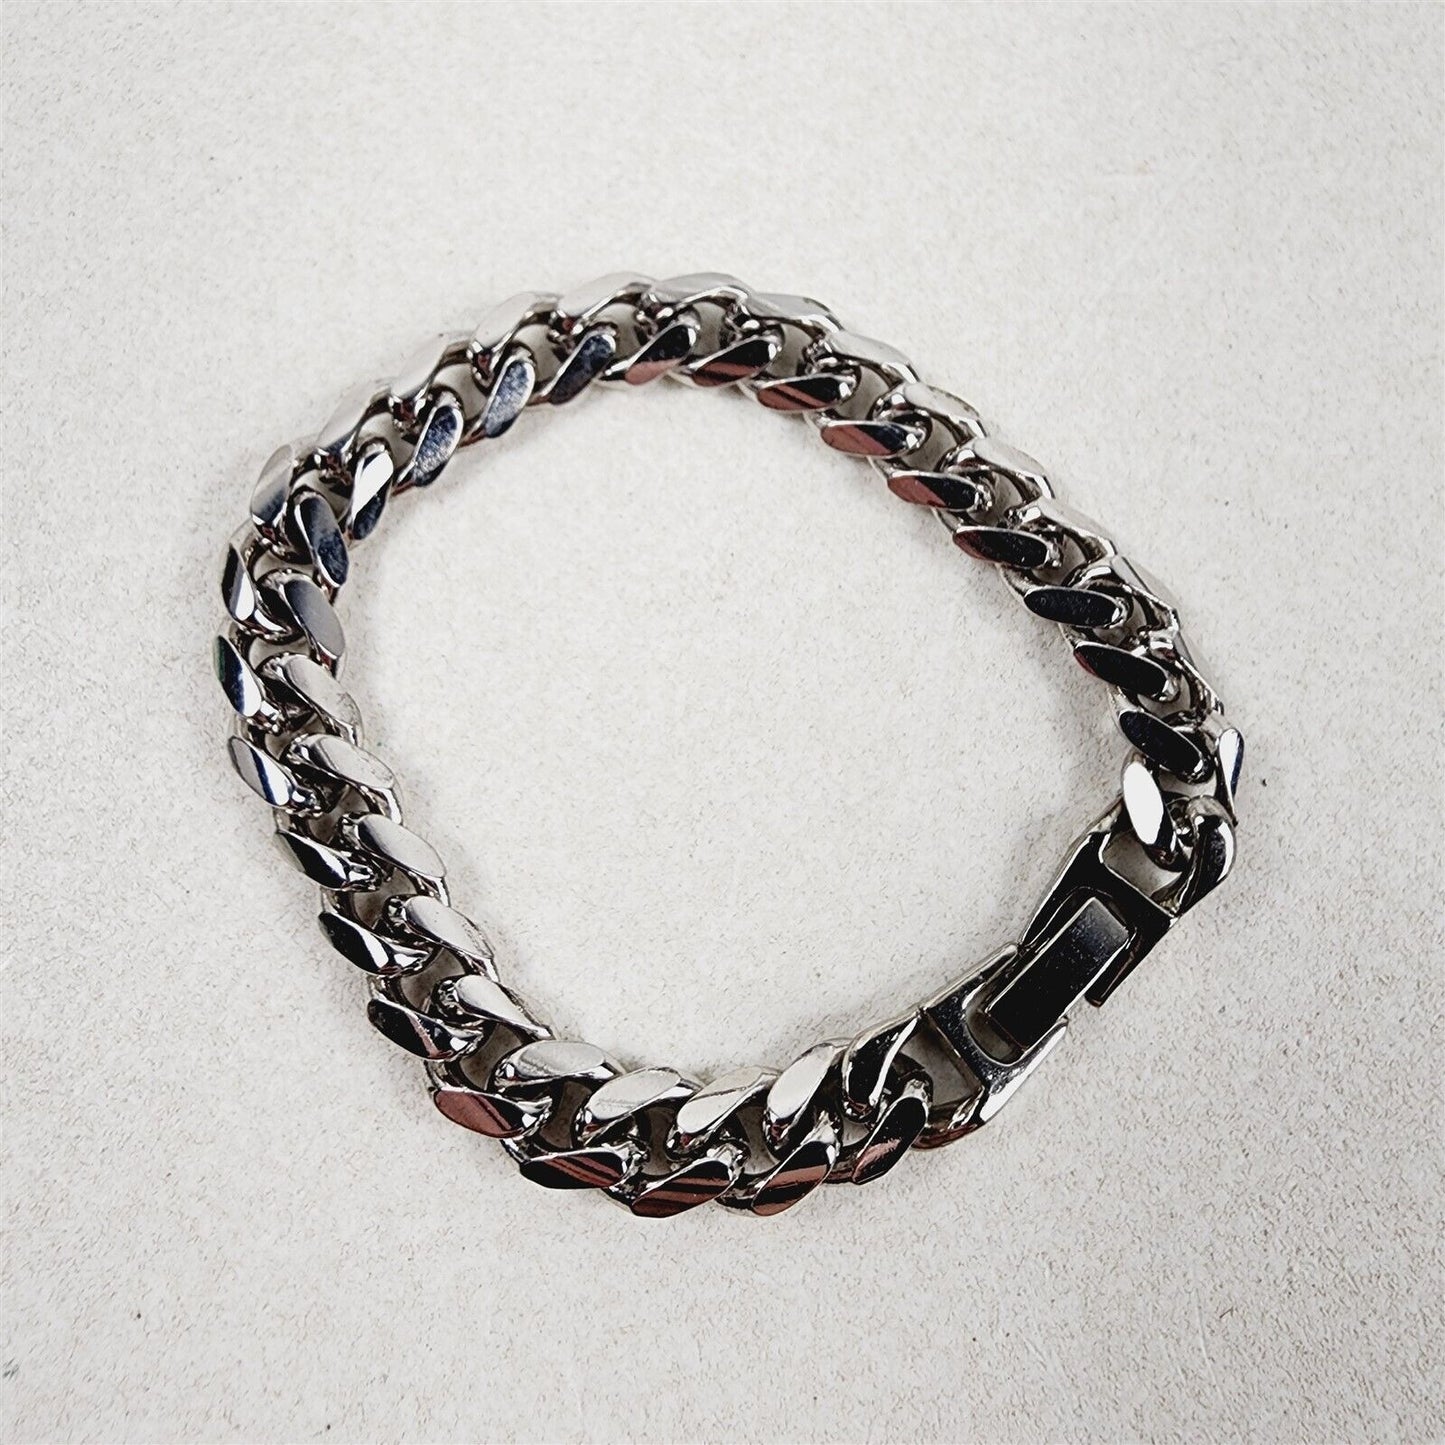 Rhodium Plated Bracelet Bevelled Curb 8mm Chain - 6 3/4"